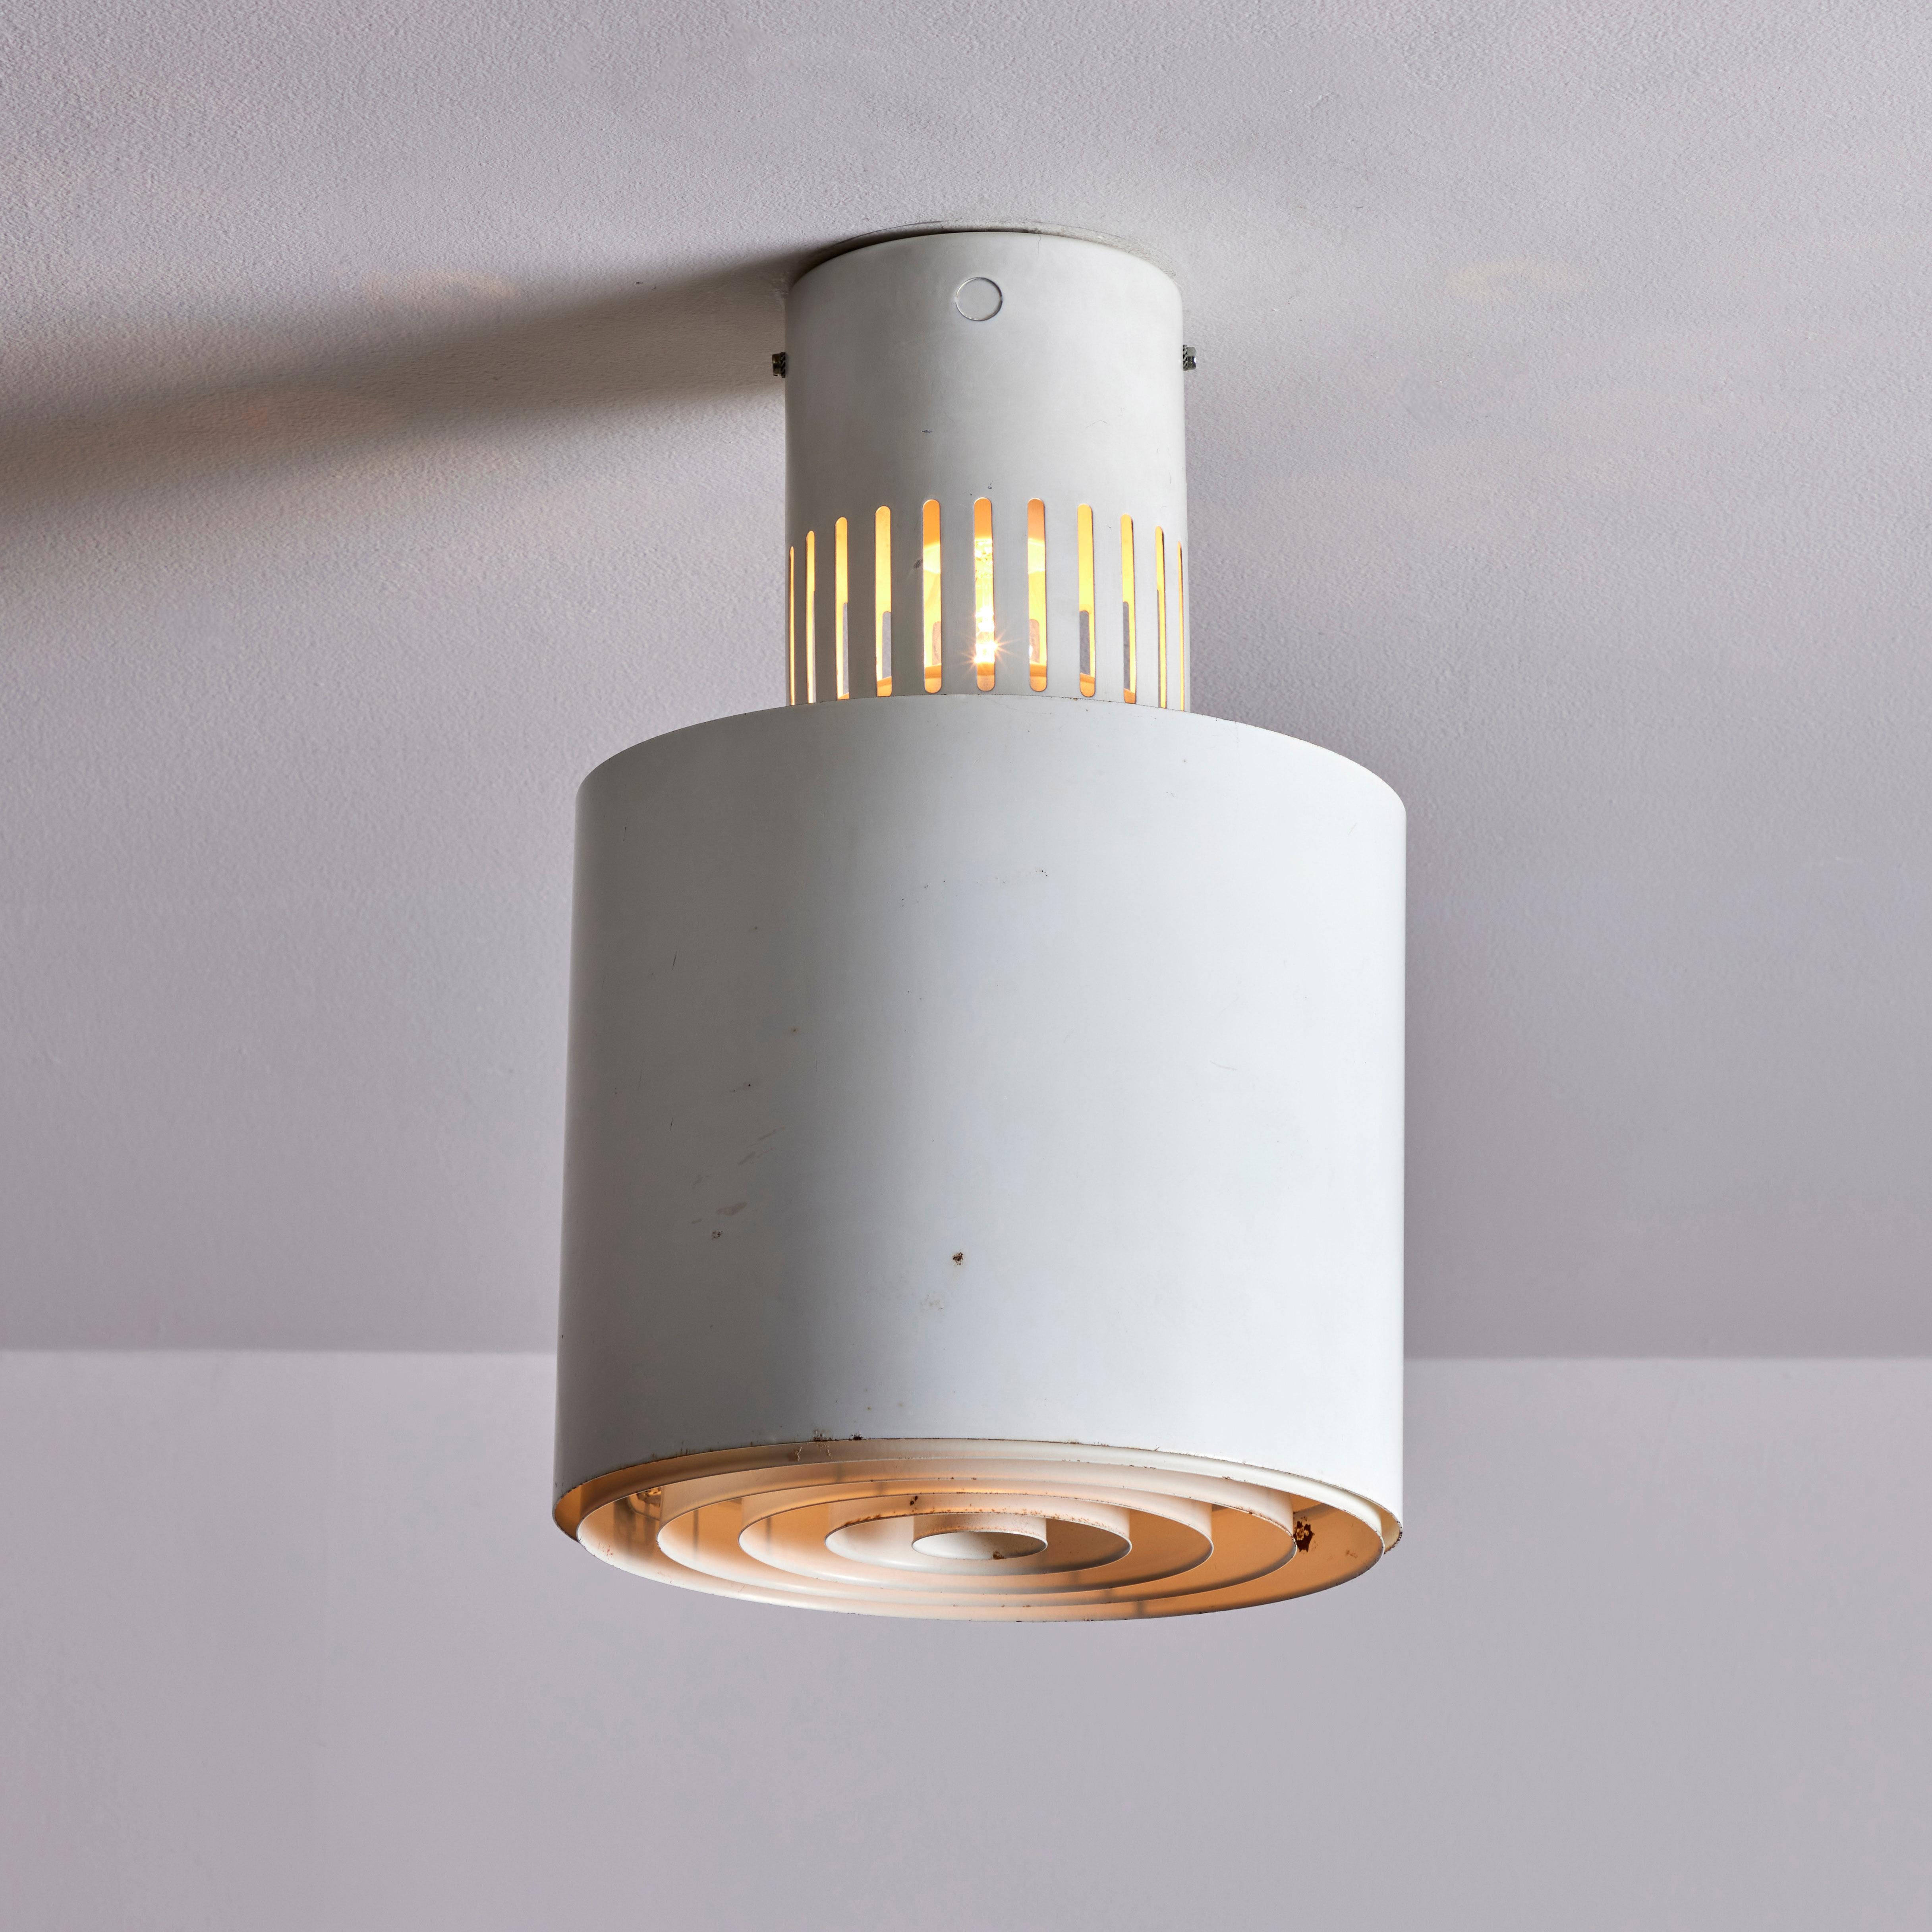 Flush mount ceiling lights by Lisa Johansson-Pape. Designed and manufactured in Finland for the National Library. Painted metal. Rewired for U.S. standards. We recommend one E27 60W maximum bulb per fixture. Bulbs are not included. Priced and sold